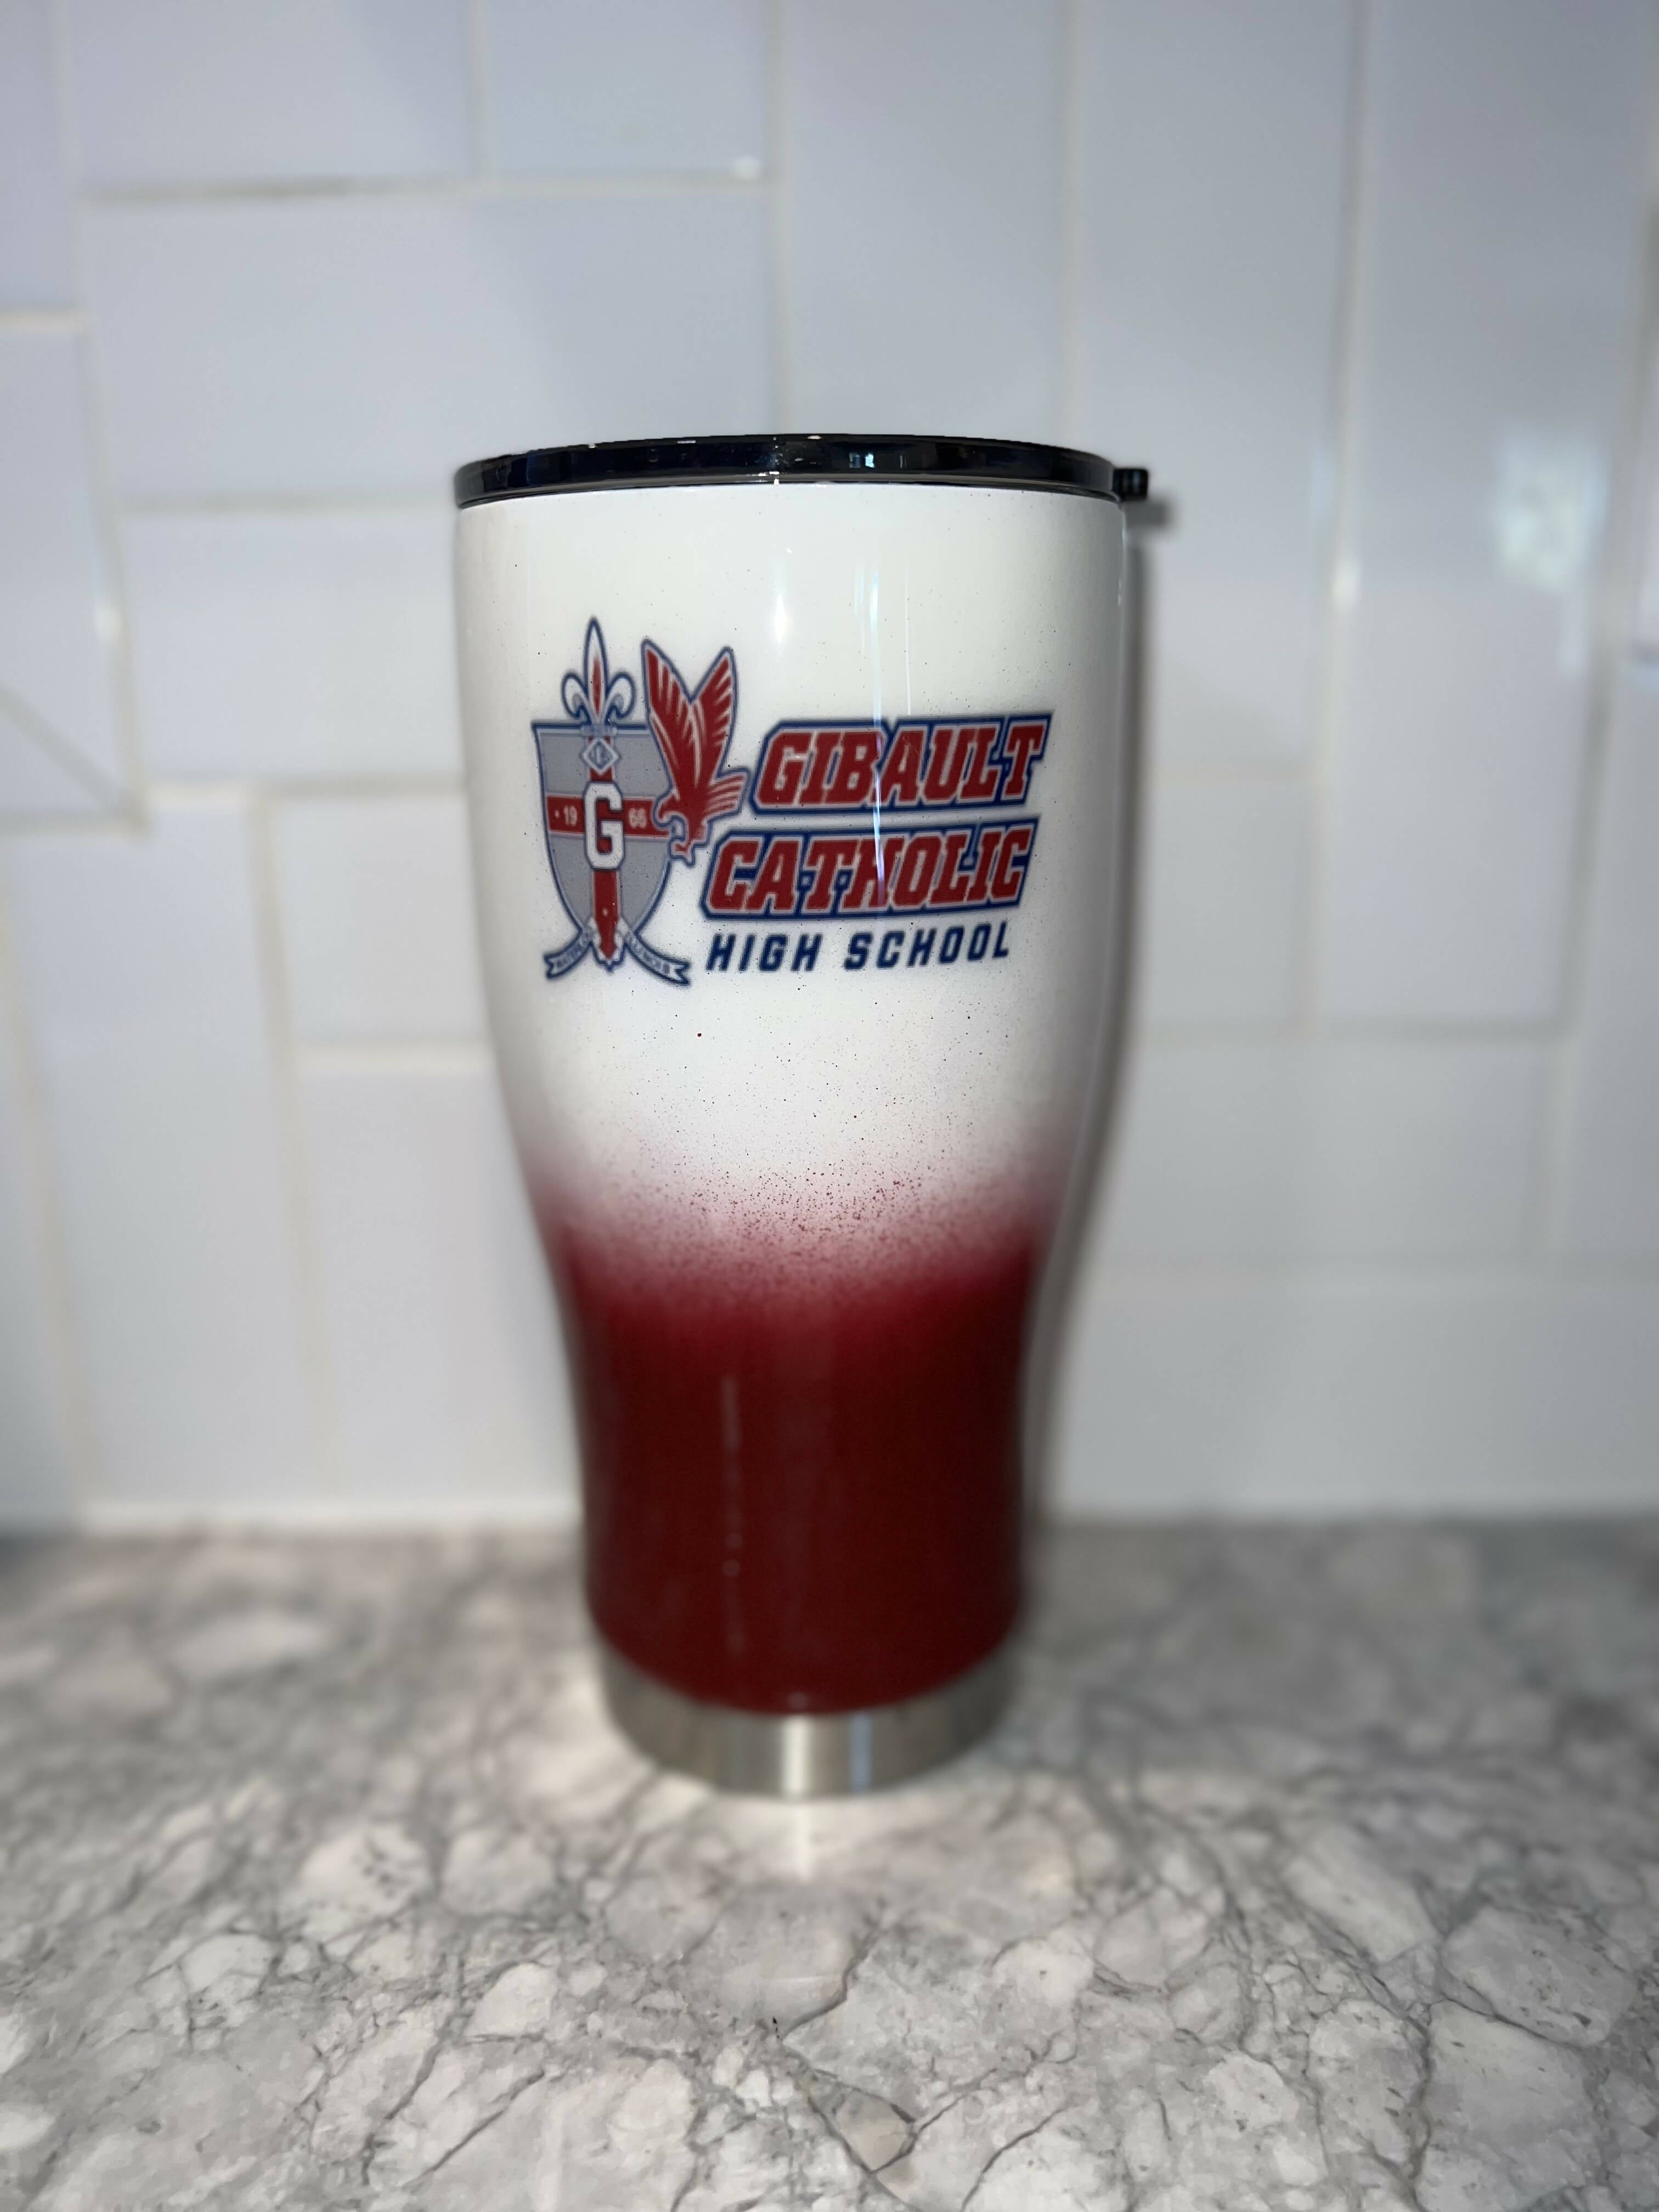 30oz white and maroon Gibault cup